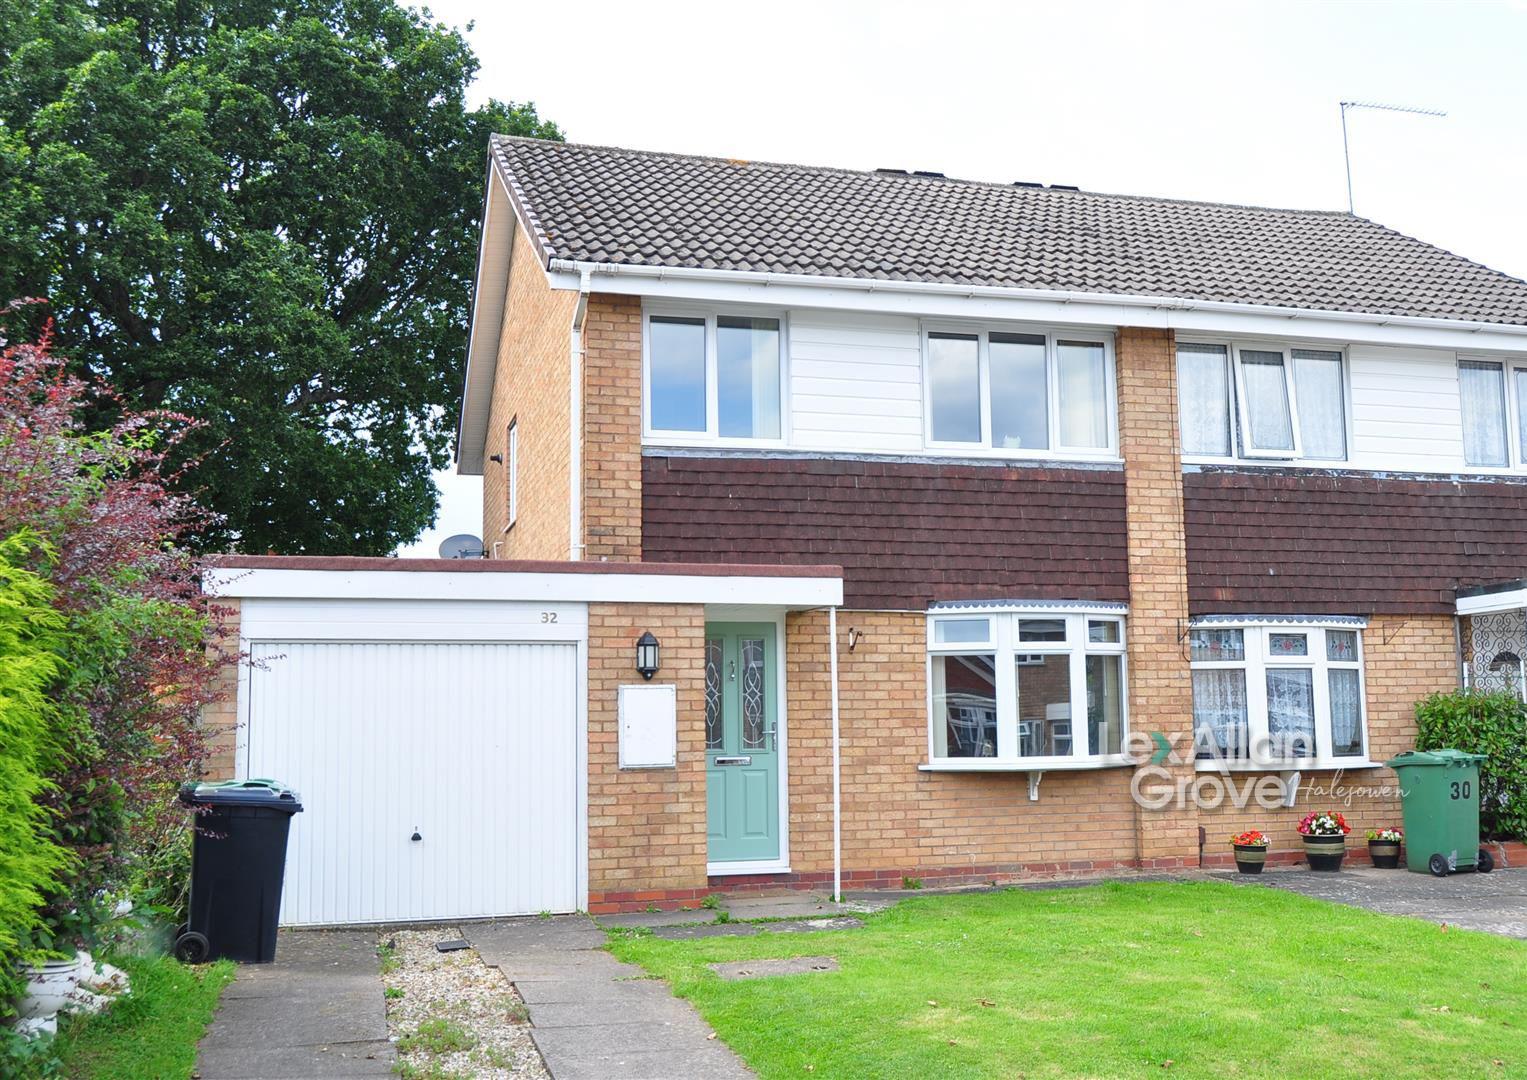 3 bed semi-detached house for sale in Long Mynd, Halesowen - Property Image 1